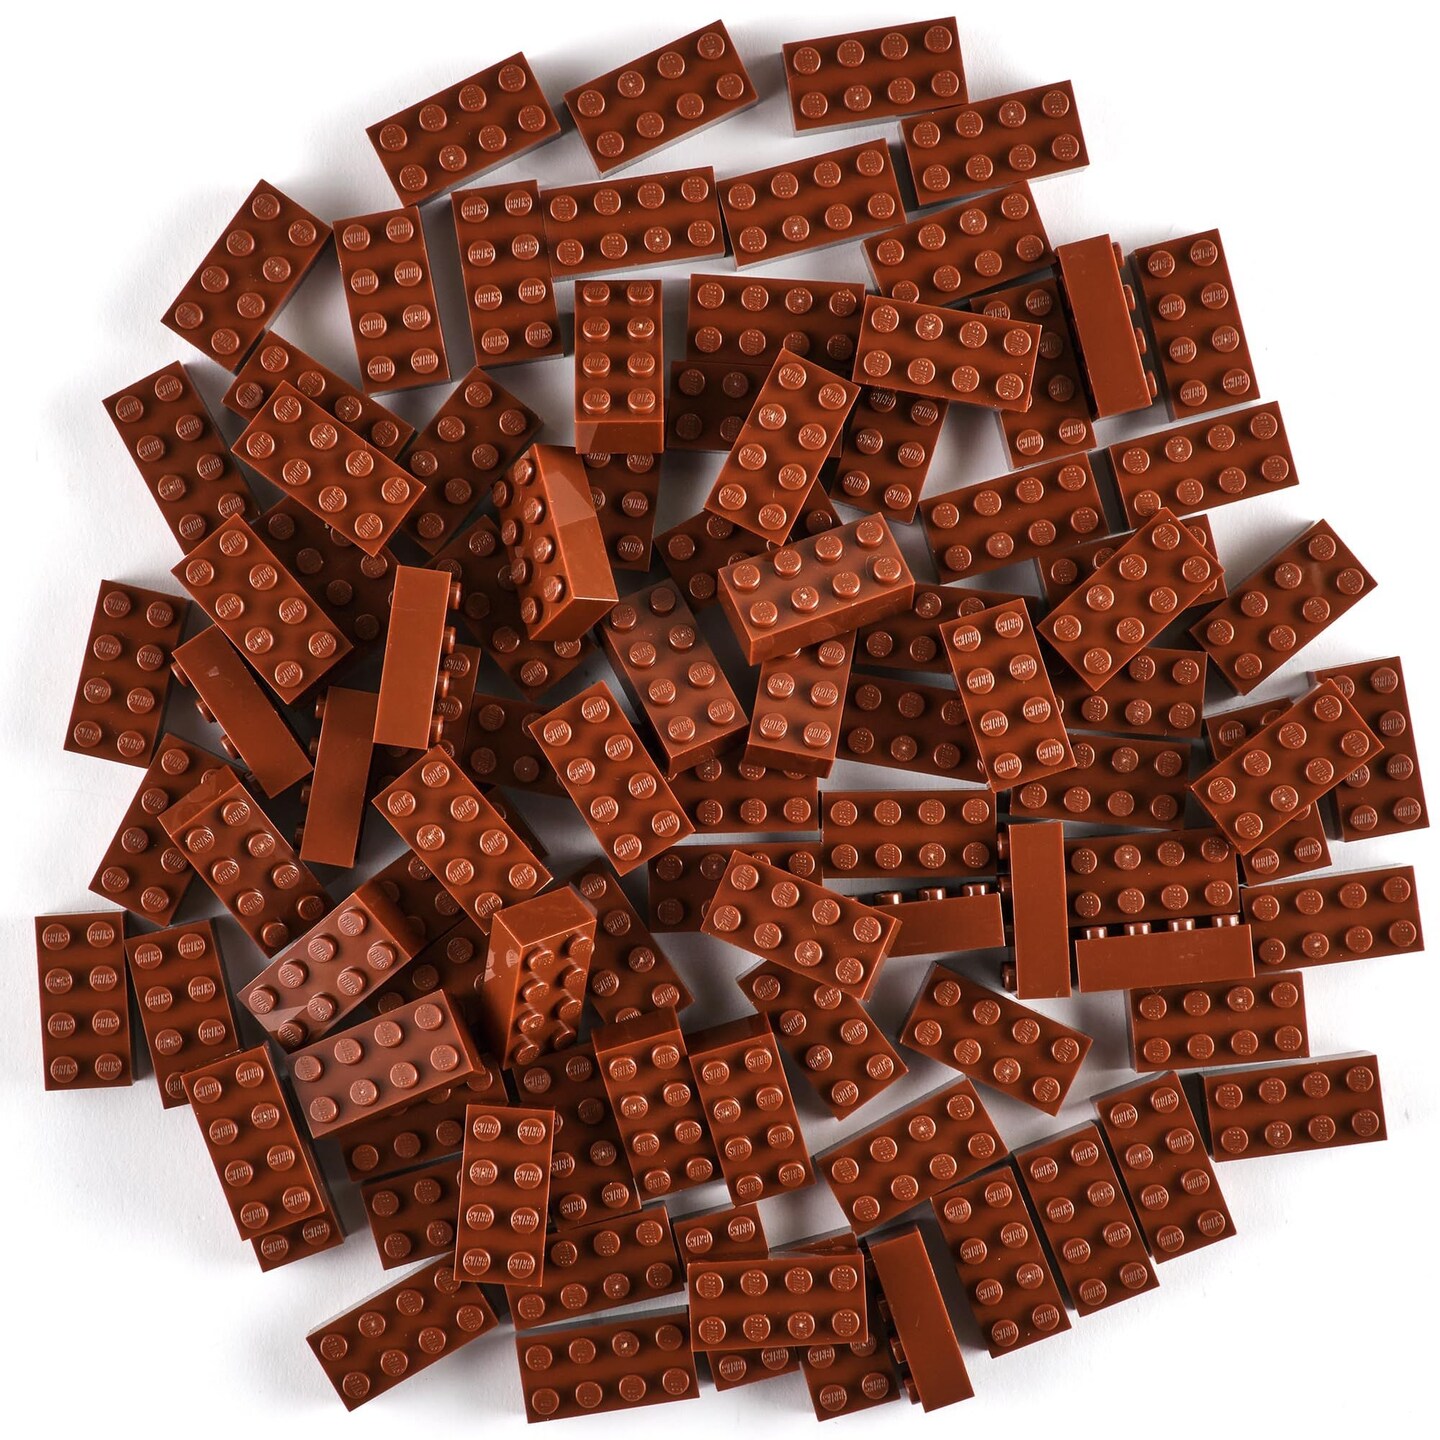 Strictly Briks Classic Bricks Starter Kit, Brown, 96 Pieces, 2x4 Inches, Building Creative Play Set for Ages 3 and Up, 100% Compatible with All Major Brick Brands